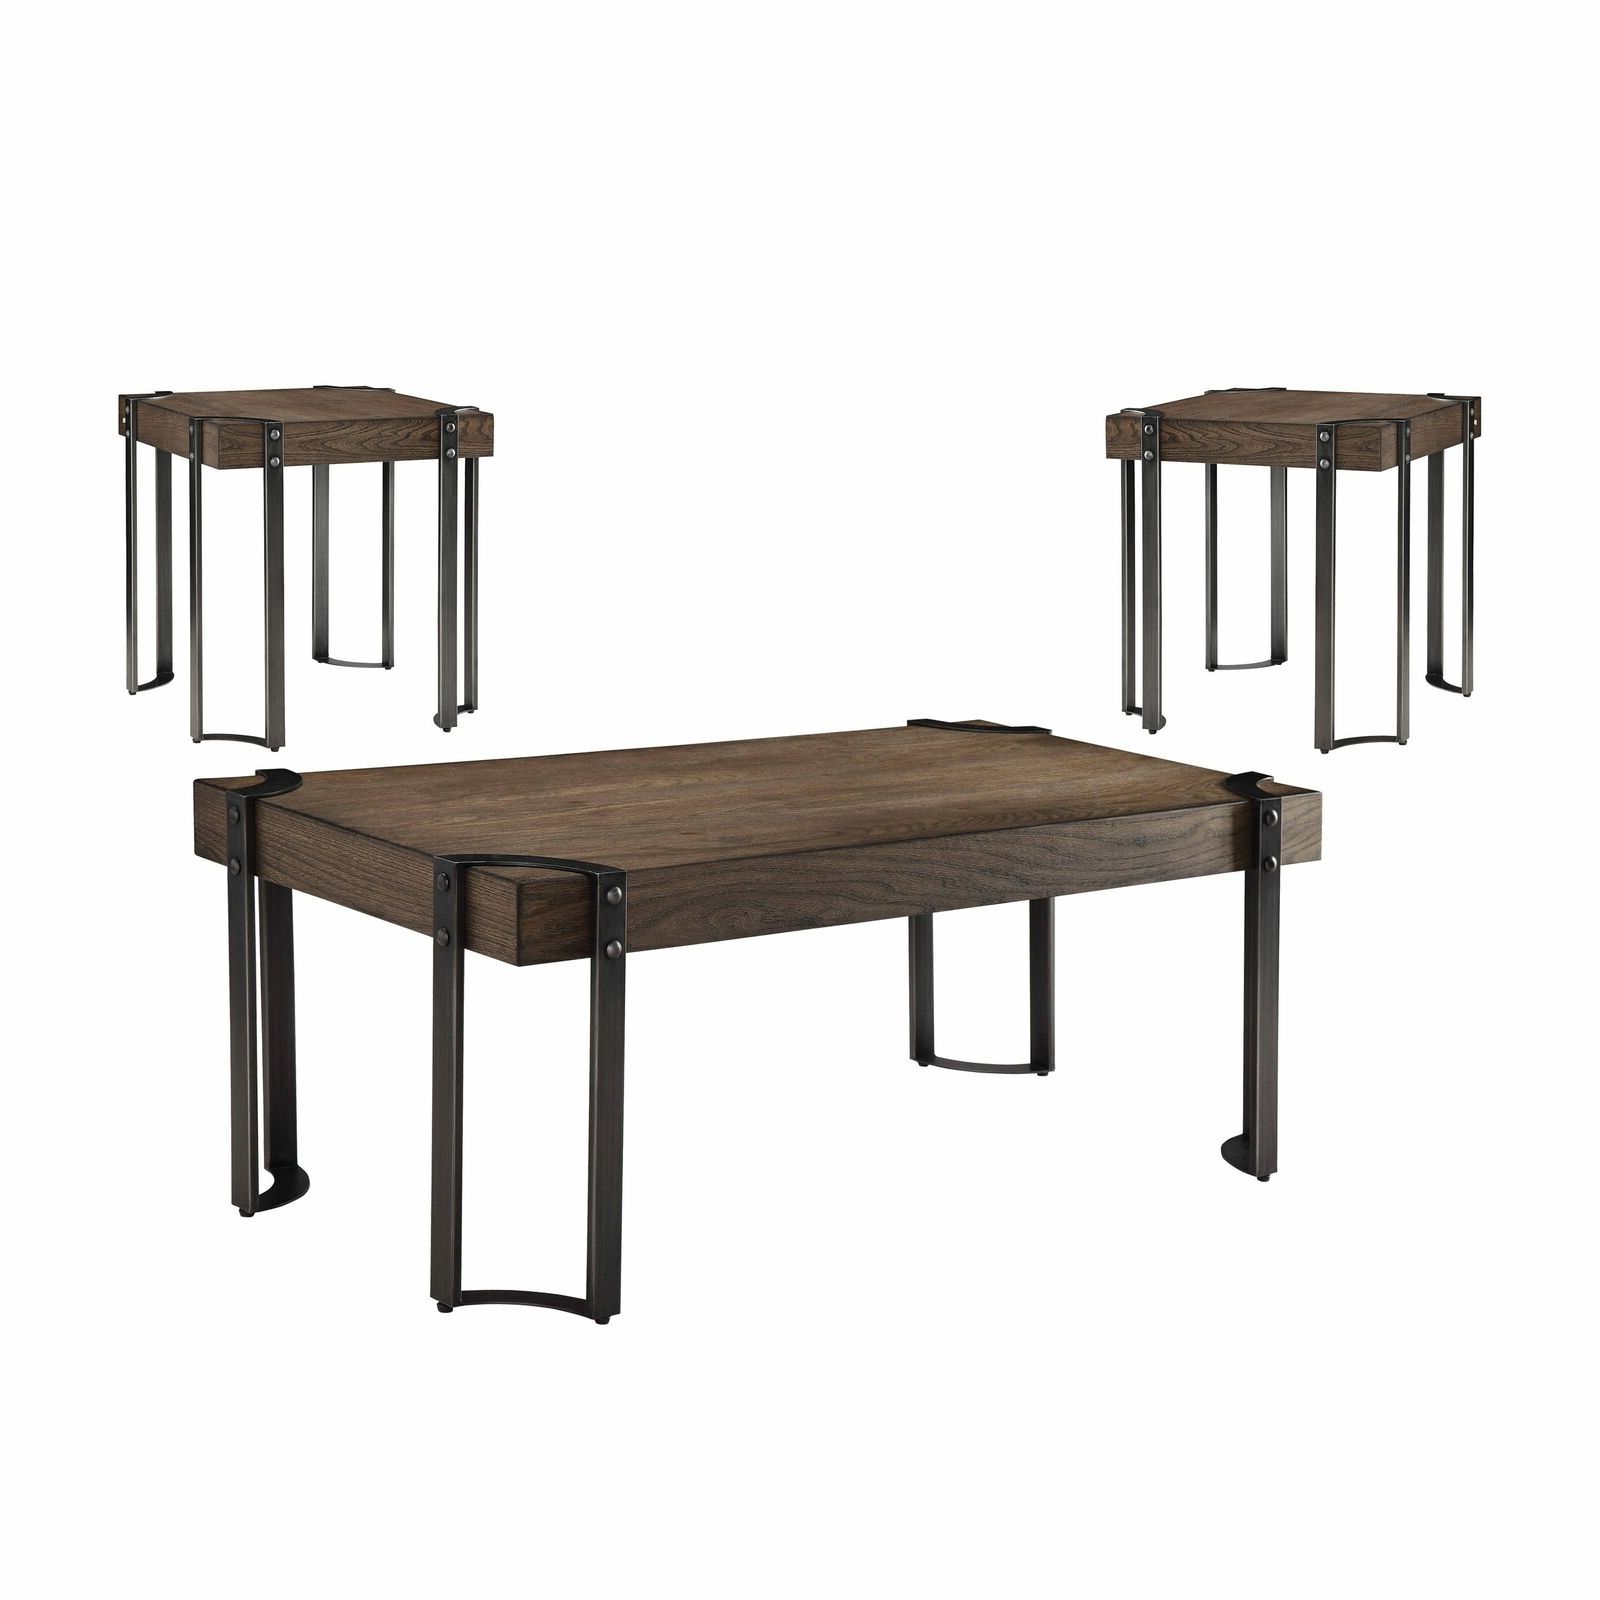 Acme Gilda 3 Piece Coffee Table Set In Weathered Dark Oak Finish 84570 Intended For Well Known Aberdeen Industrial Zinc Top Weathered Oak Trestle Coffee Tables (View 13 of 20)